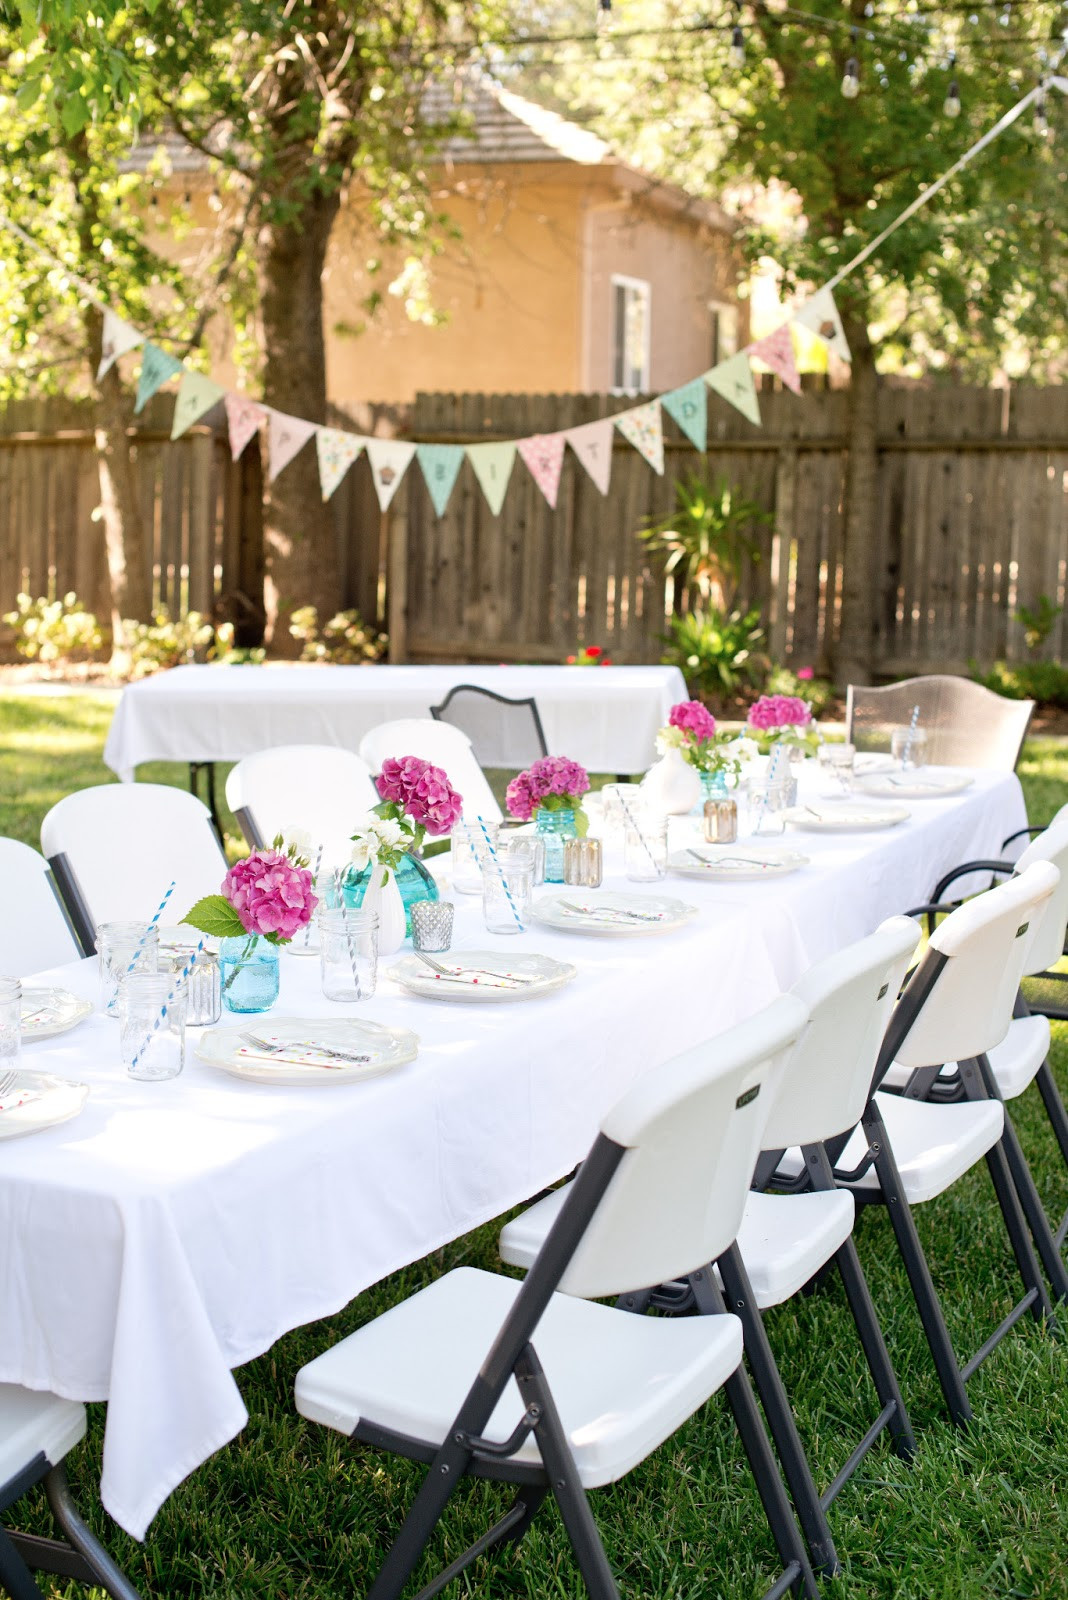 Backyard Birthday Party Decorating Ideas
 Backyard Party Decorations For Unfor table Moments